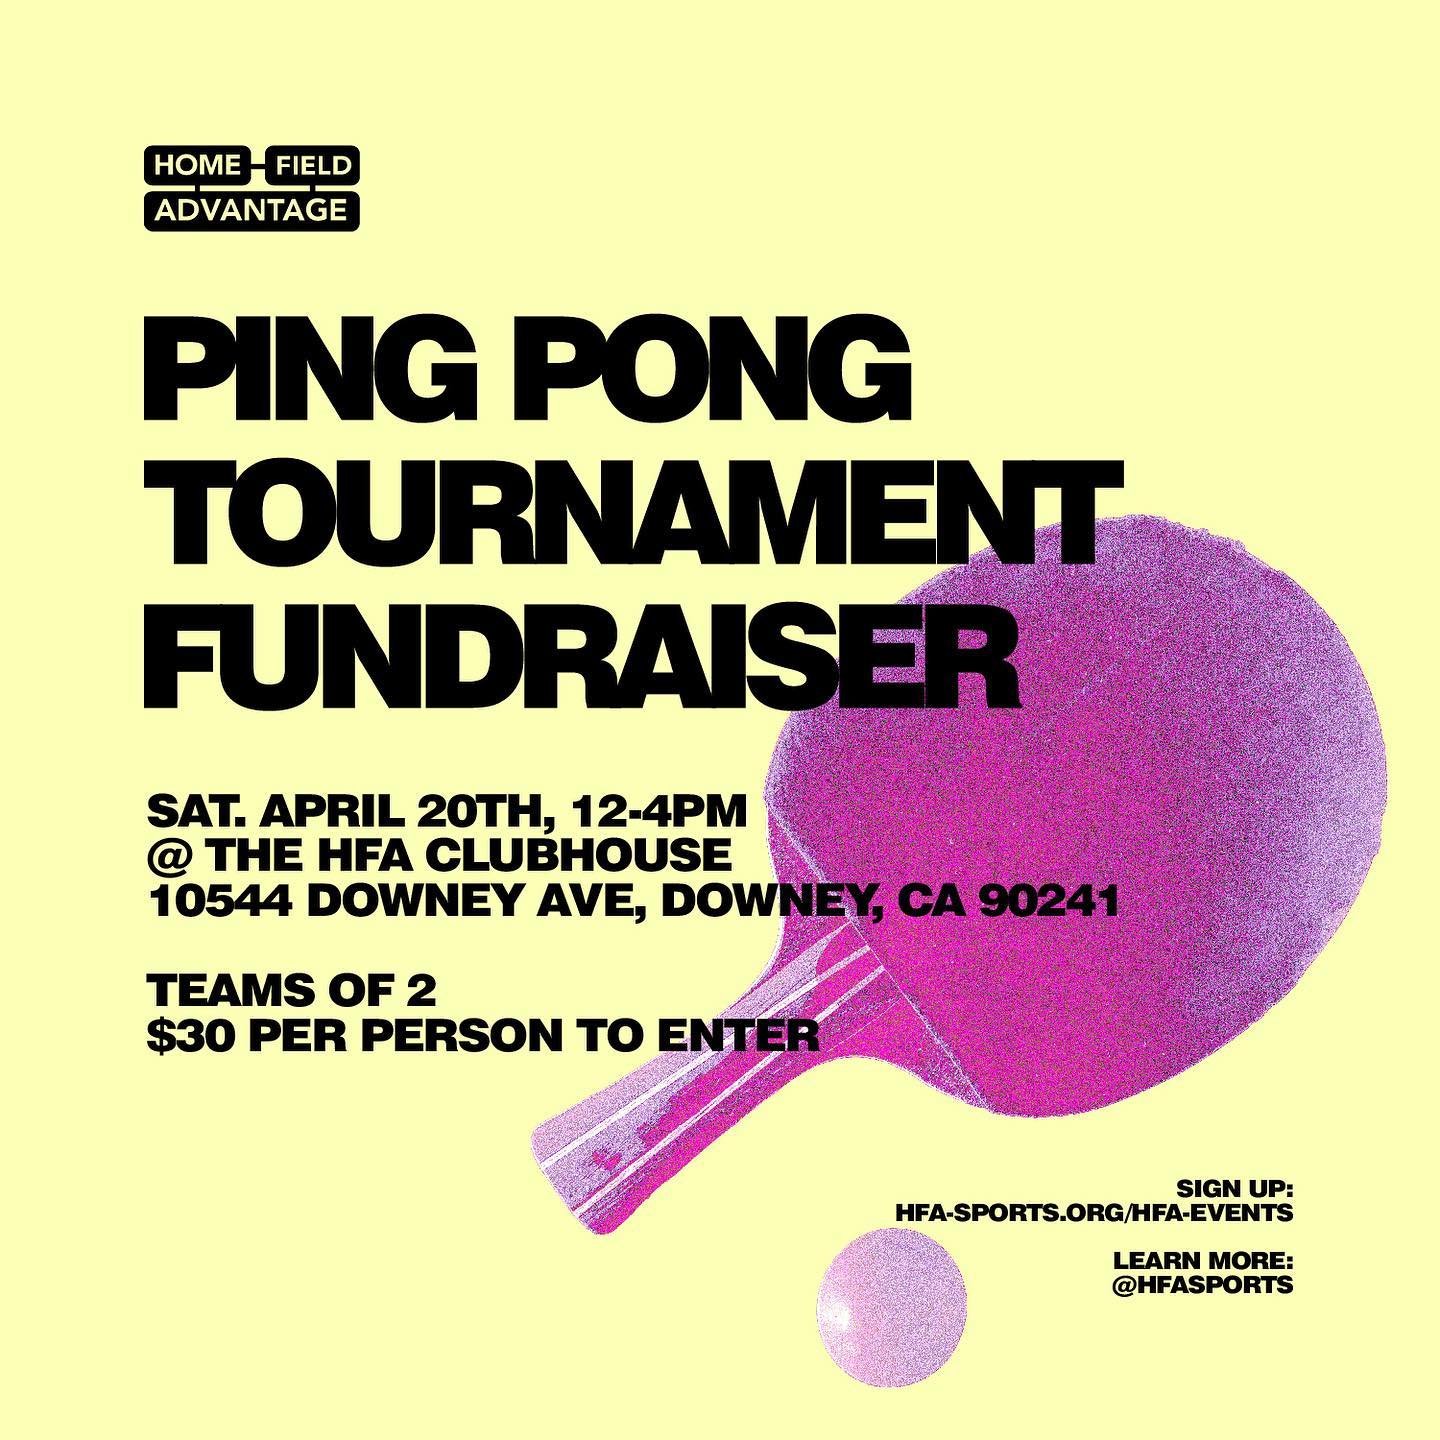 It&rsquo;s almost April 20th: our 2nd Ping Pong Tournament Fundraiser!!! 🥳🏓 

Join us for a fun day in the community, meet new people, and support HFA! 

No experience required, all levels are welcome ☺️🌟

Sign up by THURSDAY APRIL 18TH through th